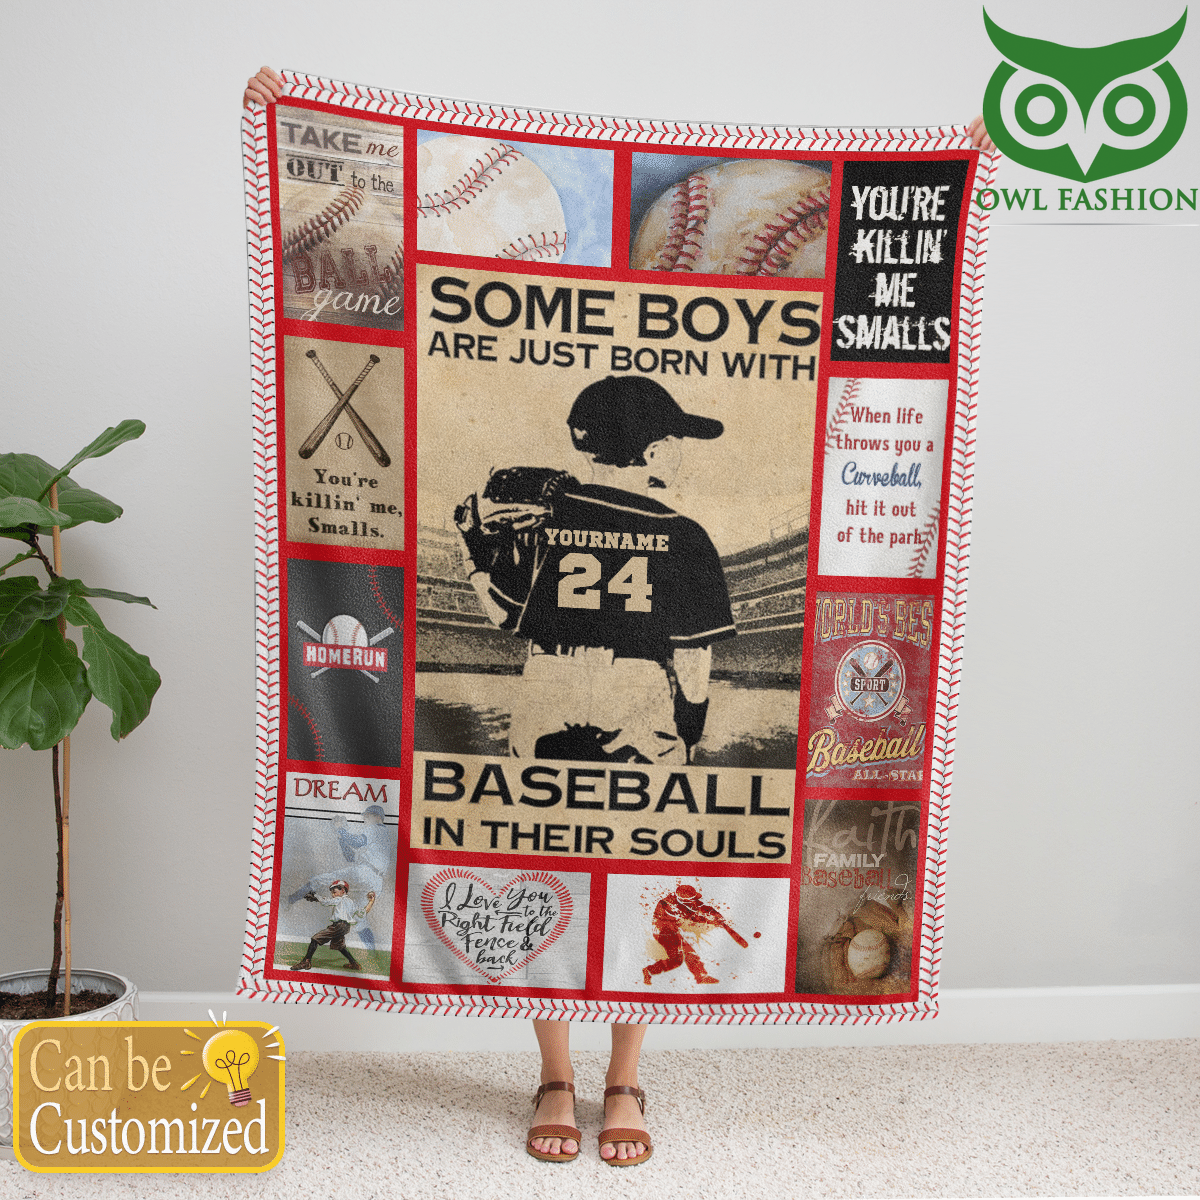 109 Some boys are just born with baseball in their souls Fleece blanket